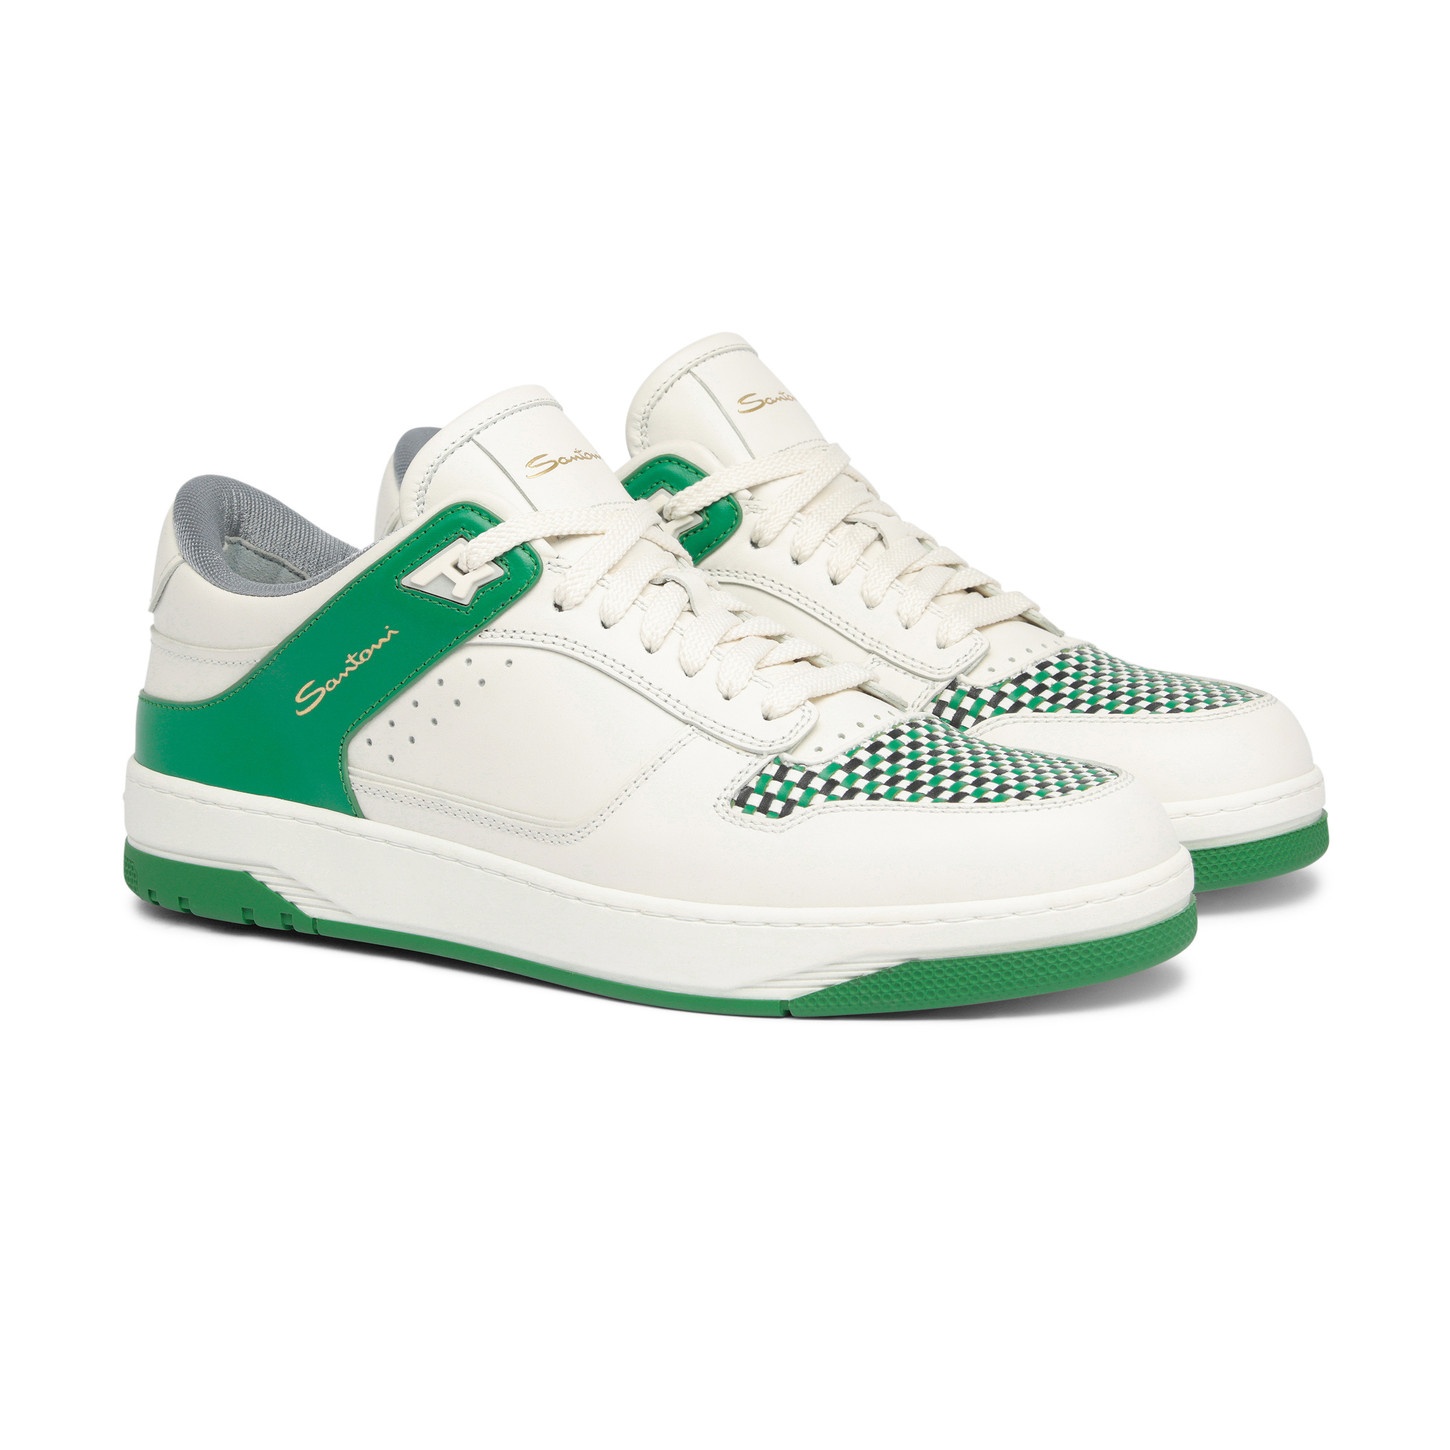 Men's white and green leather Sneak-Air sneaker - 3